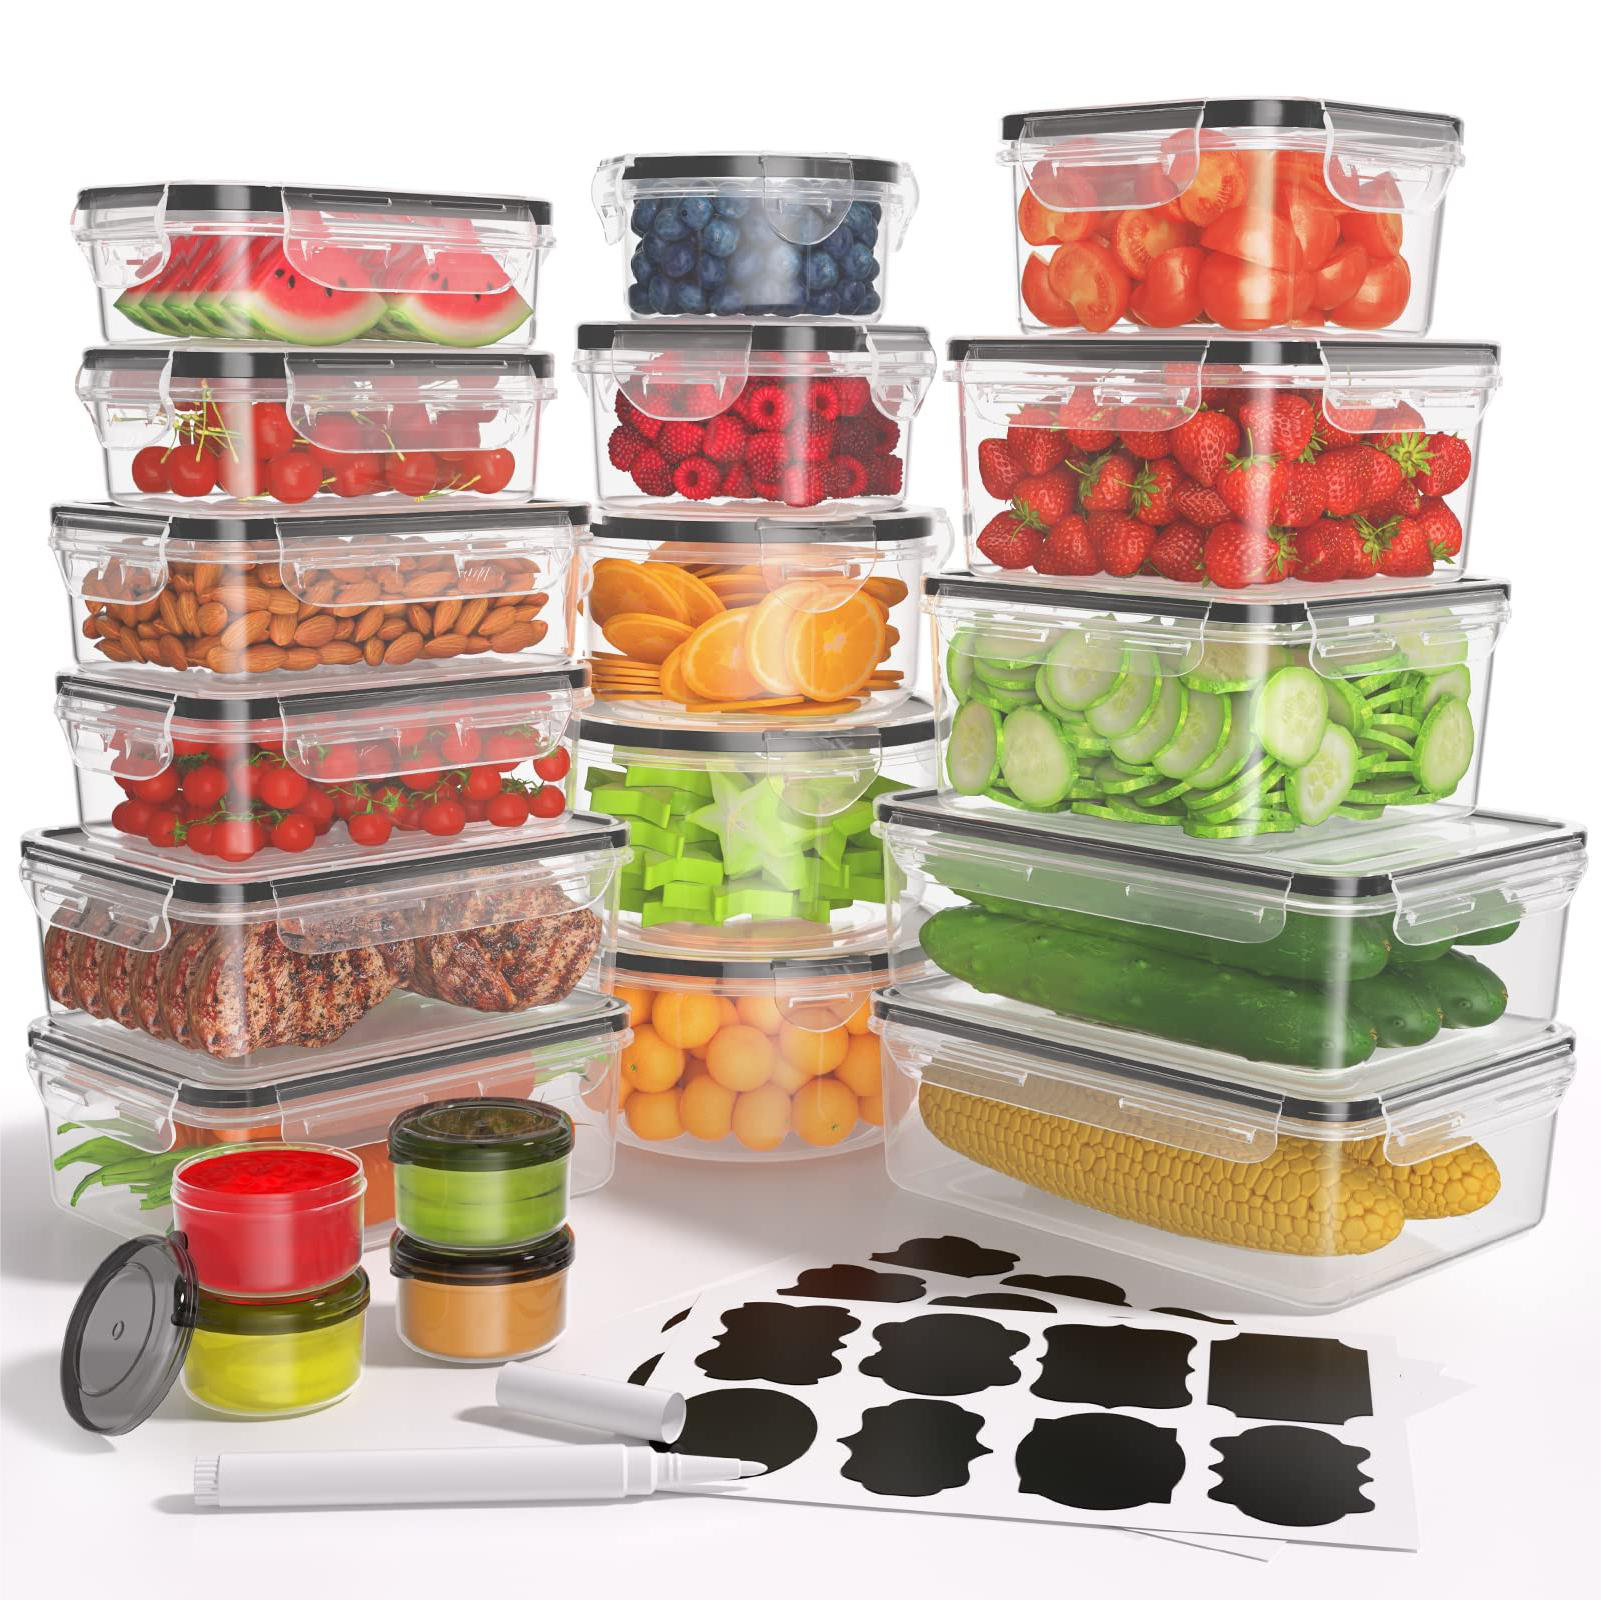 Cheer Collection Set Of 4 Durable Clear Refrigerator Organizer